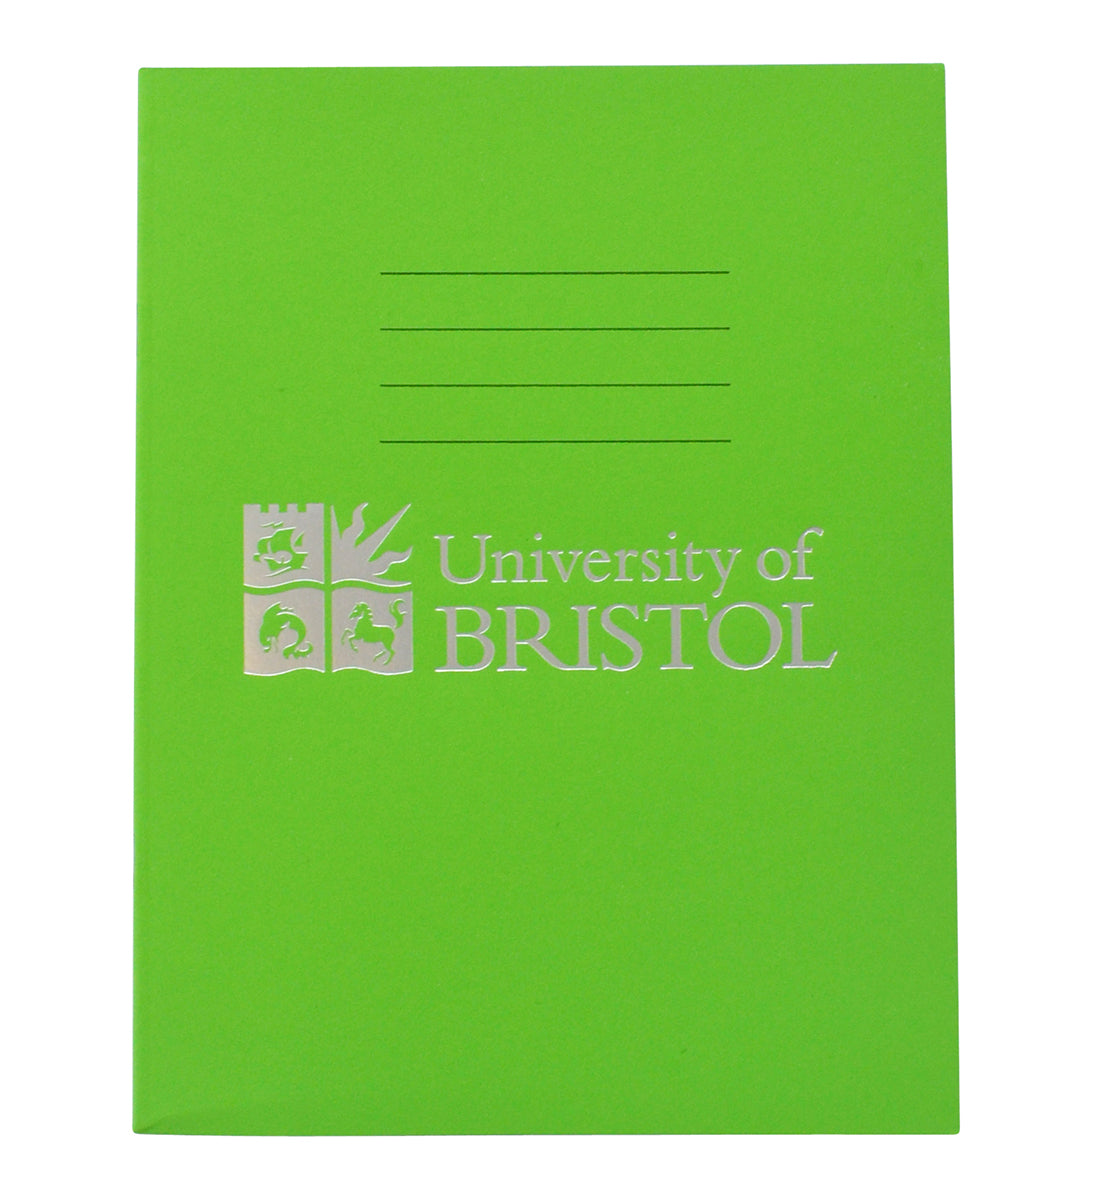 A green exercise book with four thin black lines at the centre top of the book. Below this is the Logo of the University of Bristol and the words "University of Bristol" in silver.